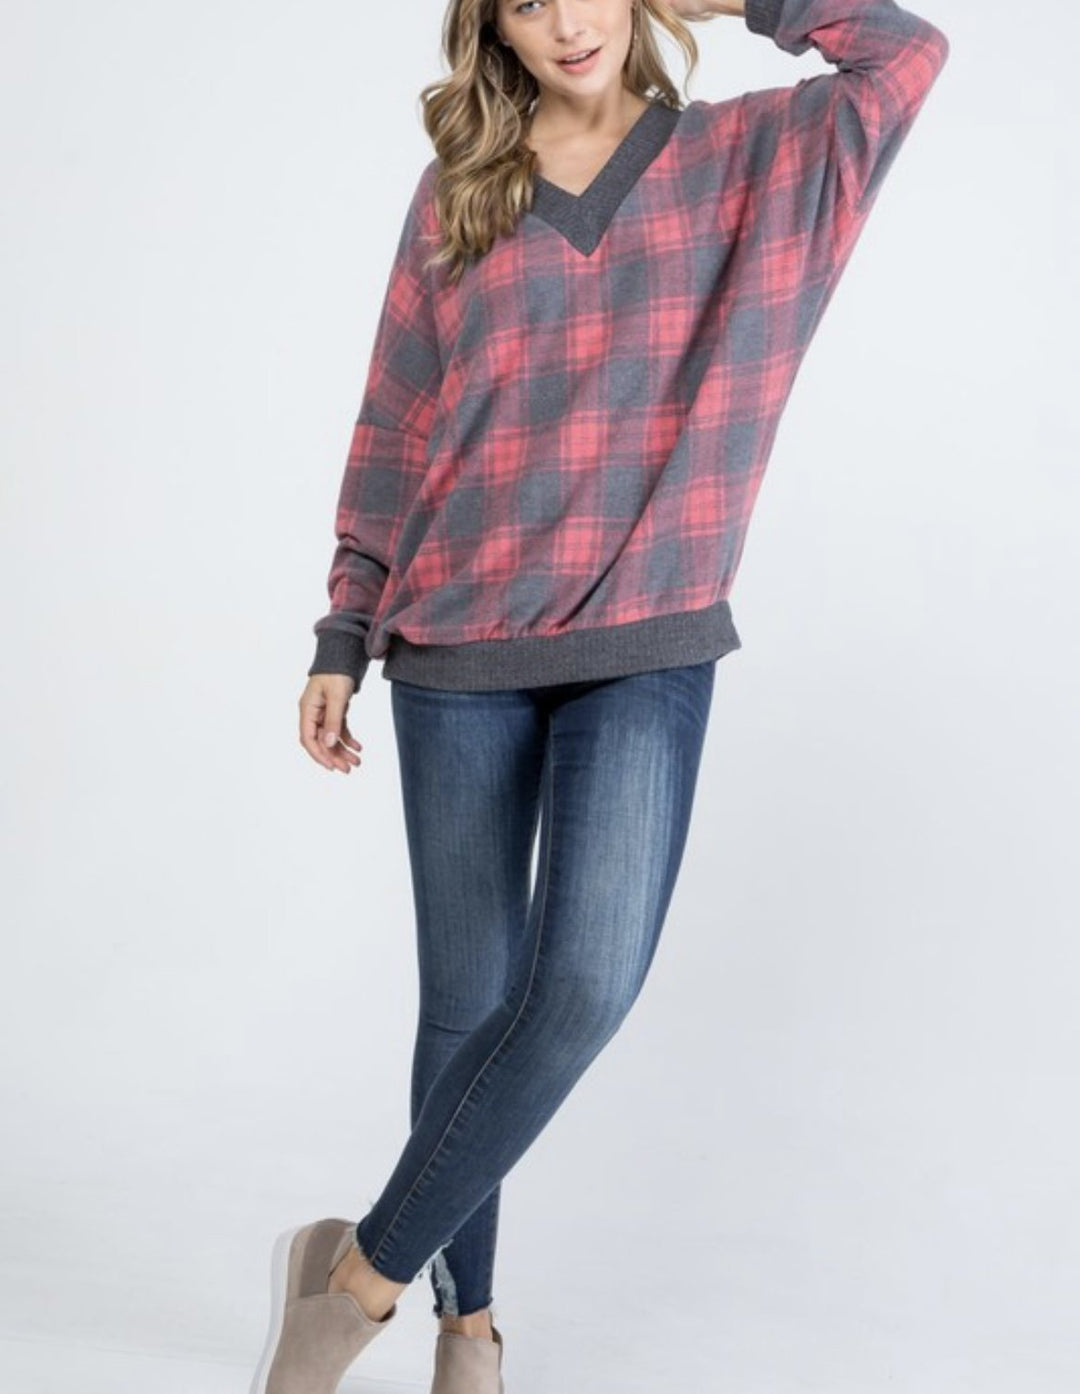 Brushed Hacci V-Neck Red Plaid Sweater-sweater-P & Rose-Styled by Steph-Women's Fashion Clothing Boutique, Indiana